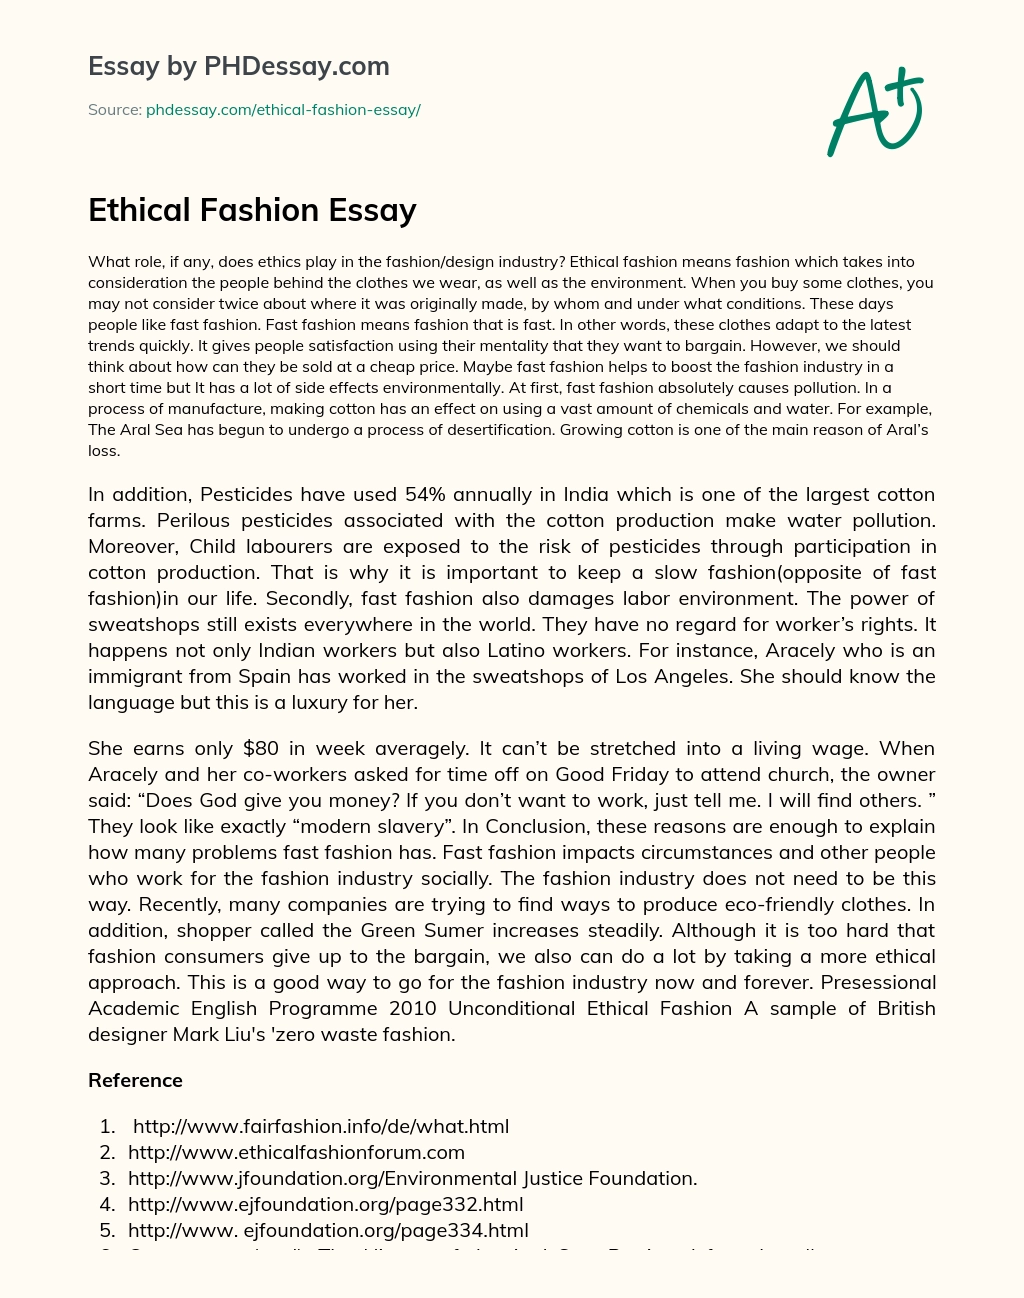 The Ethics of Fast Fashion and its Environmental Impact essay